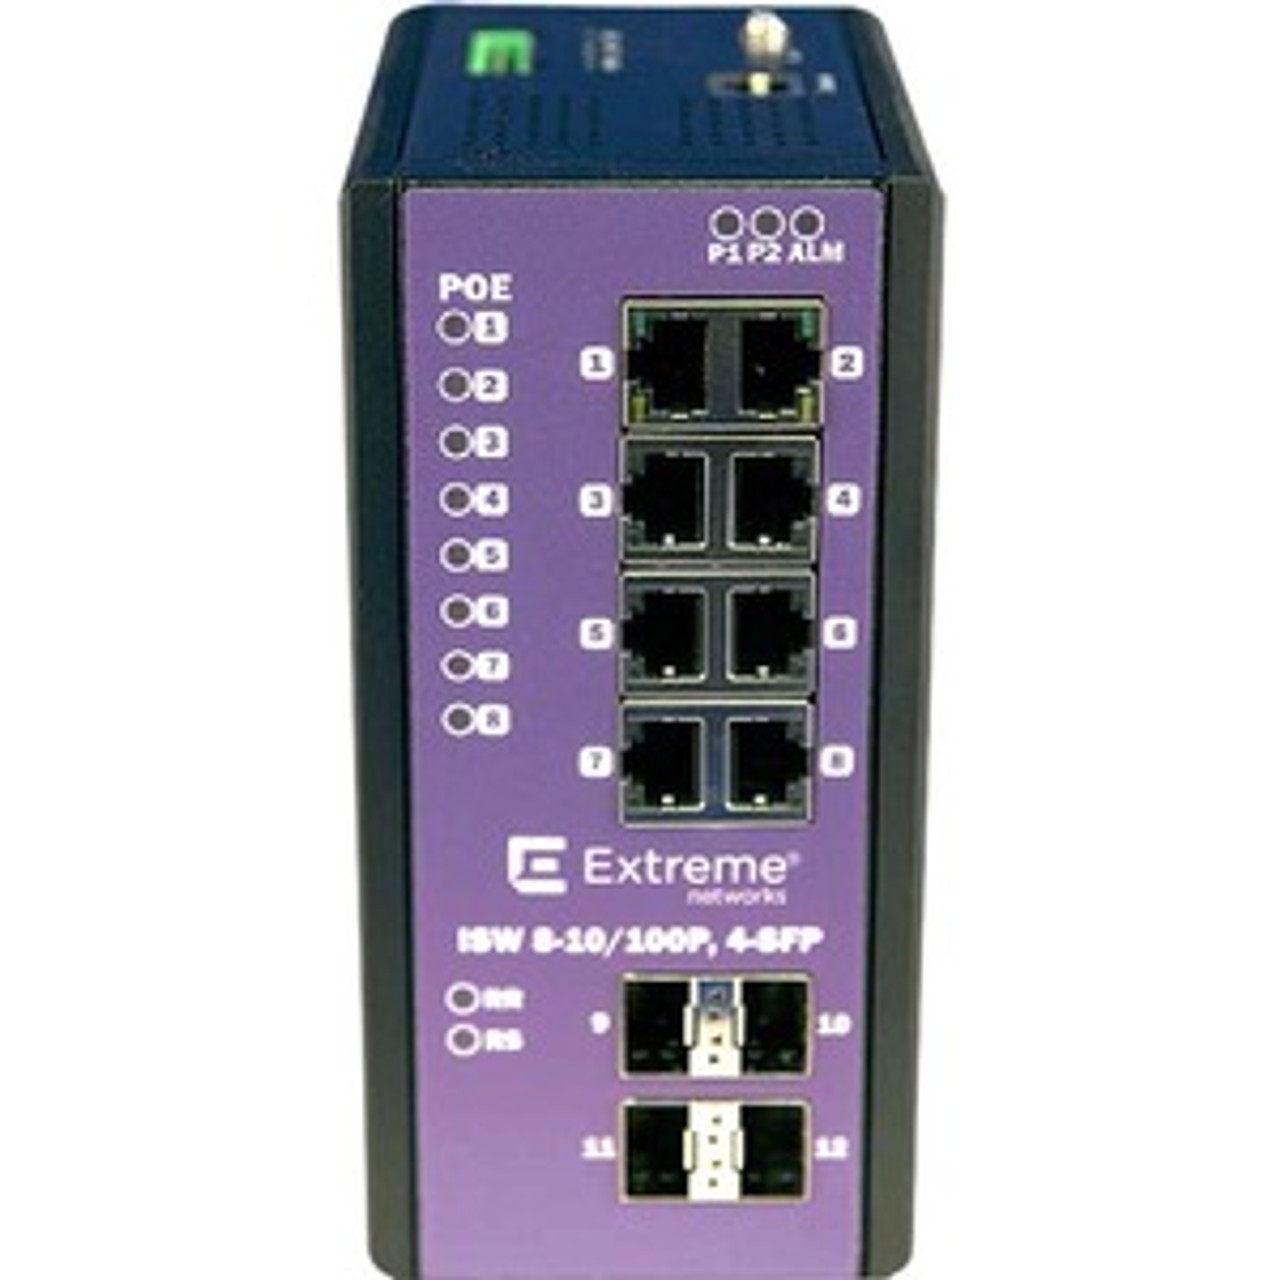 16802 Extreme Networks ISW 8-10/100P, 4-SFP Ethernet Switch - 8 Ports - Manageable - Fast Ethernet - 100Base-TX - 2 Layer Supported - Modular - Power